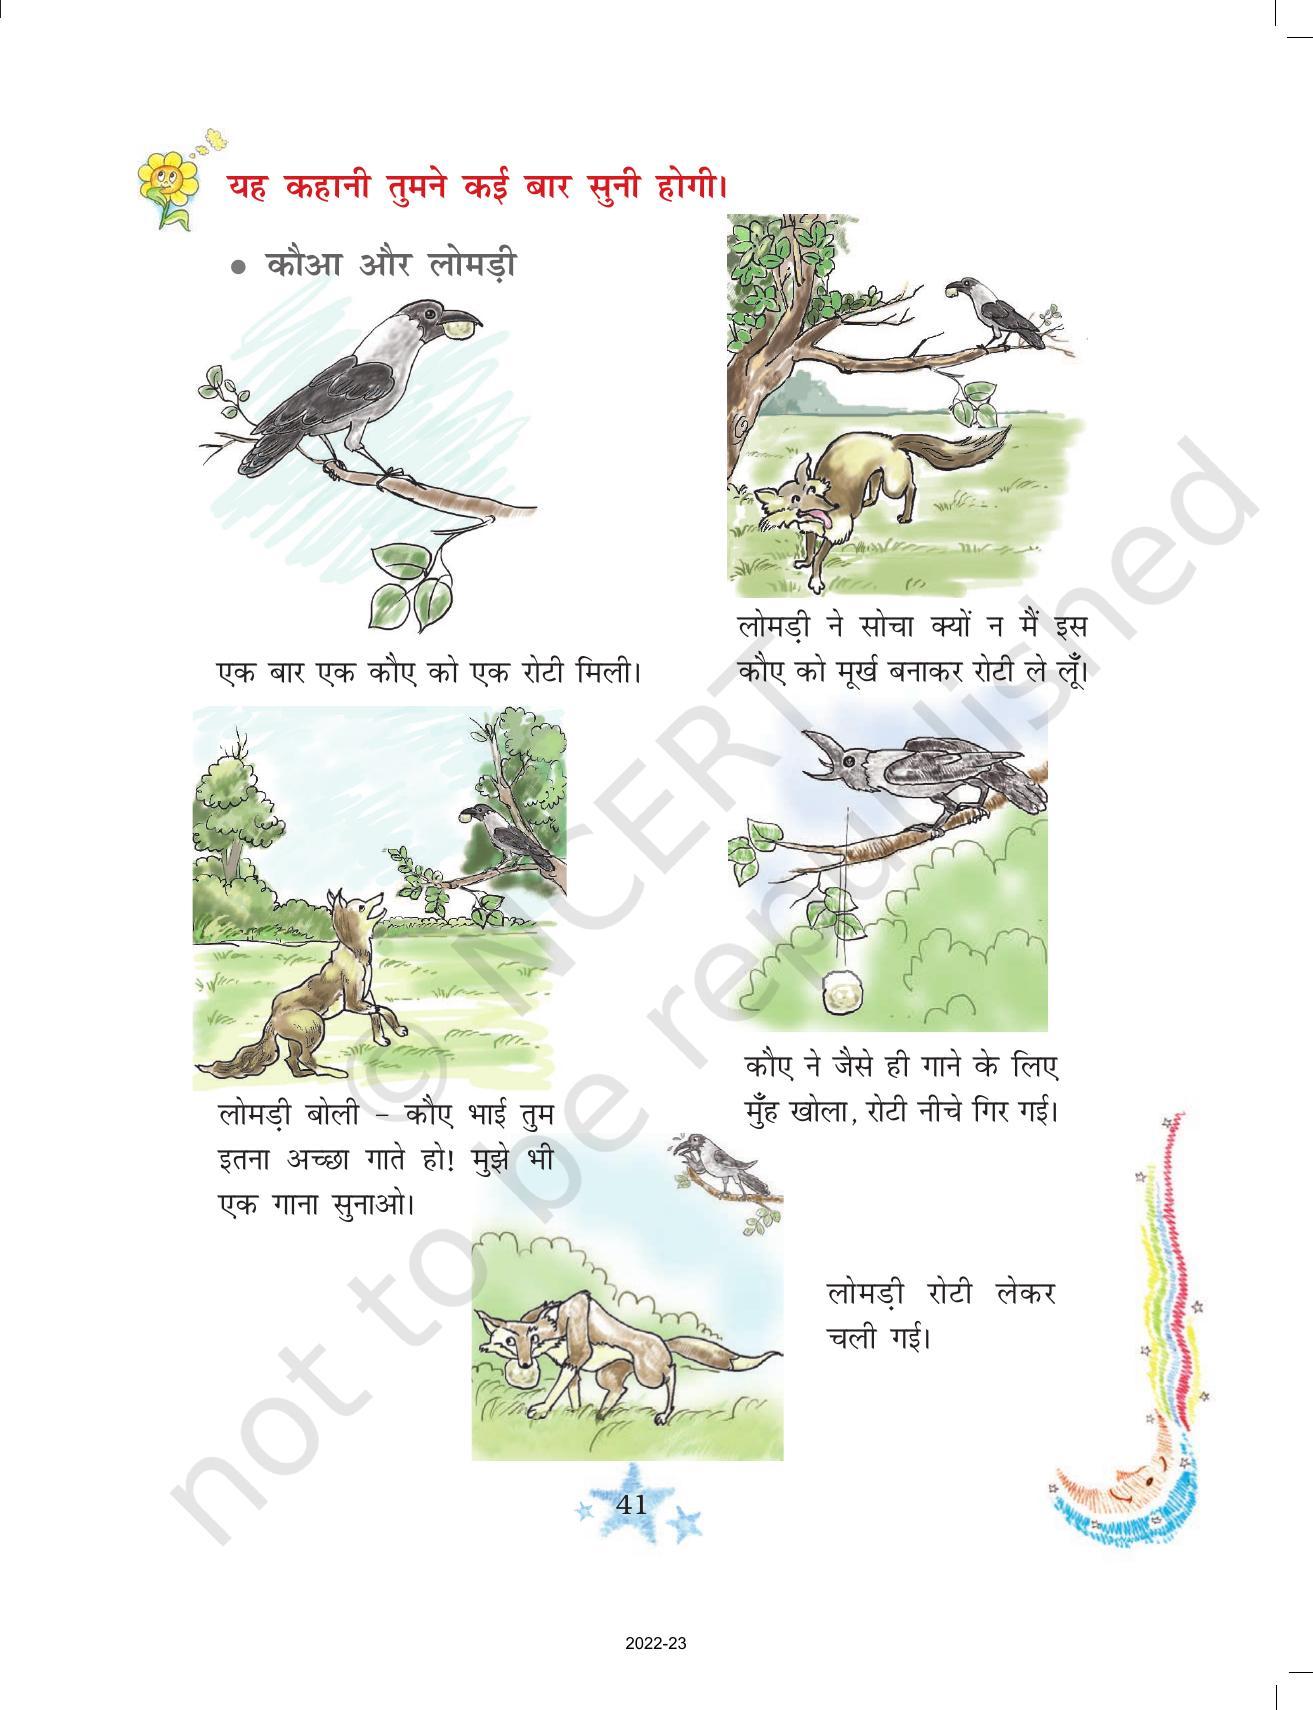 NCERT Book for Class 3 Hindi Chapter 5-हमसे सब कहते - Page 6